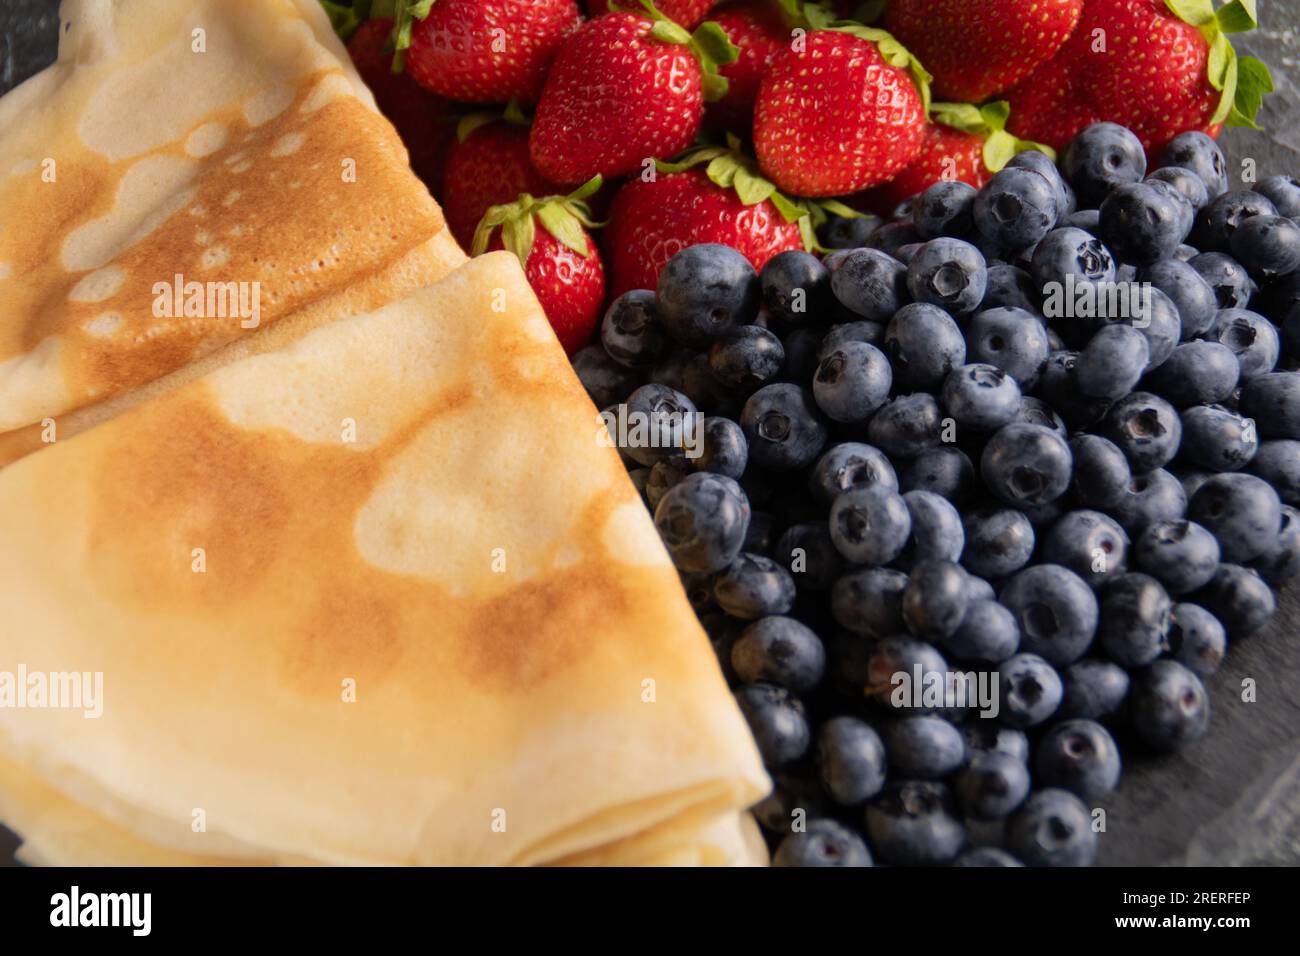 photo lots of fresh juicy berries lying next to pancakes on a plate top view Stock Photo